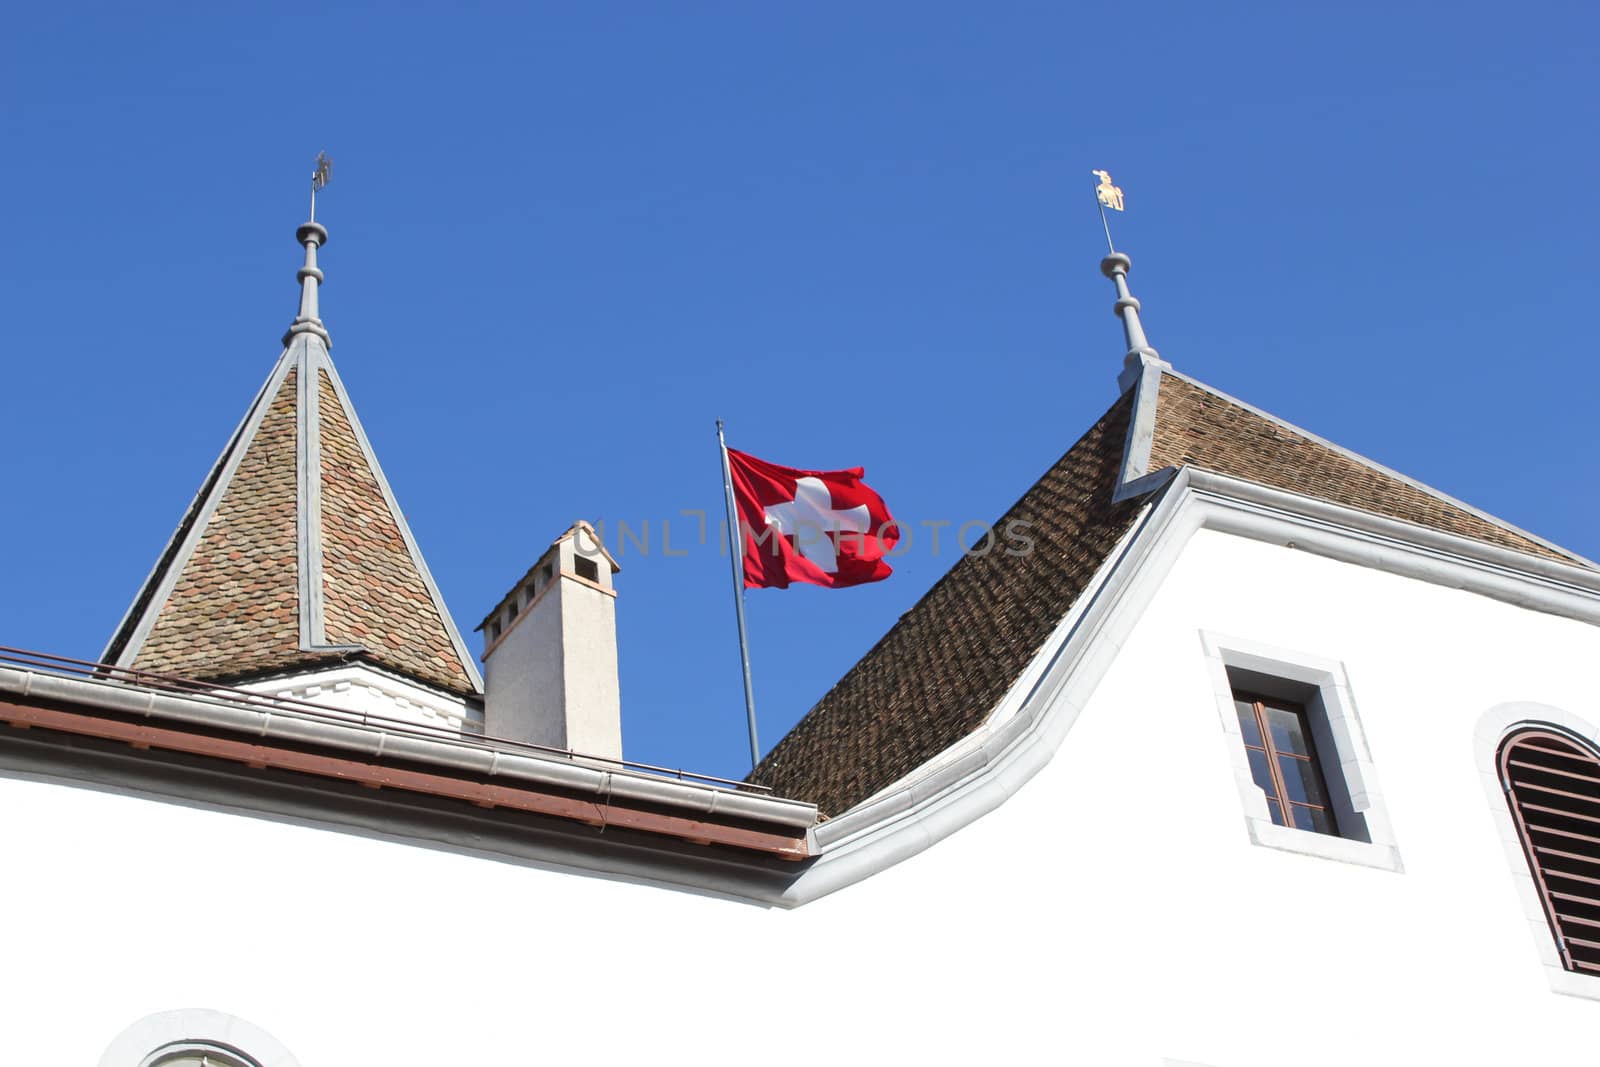 Swiss flag floating on the roof of Nyon castle, Switzerland by Elenaphotos21